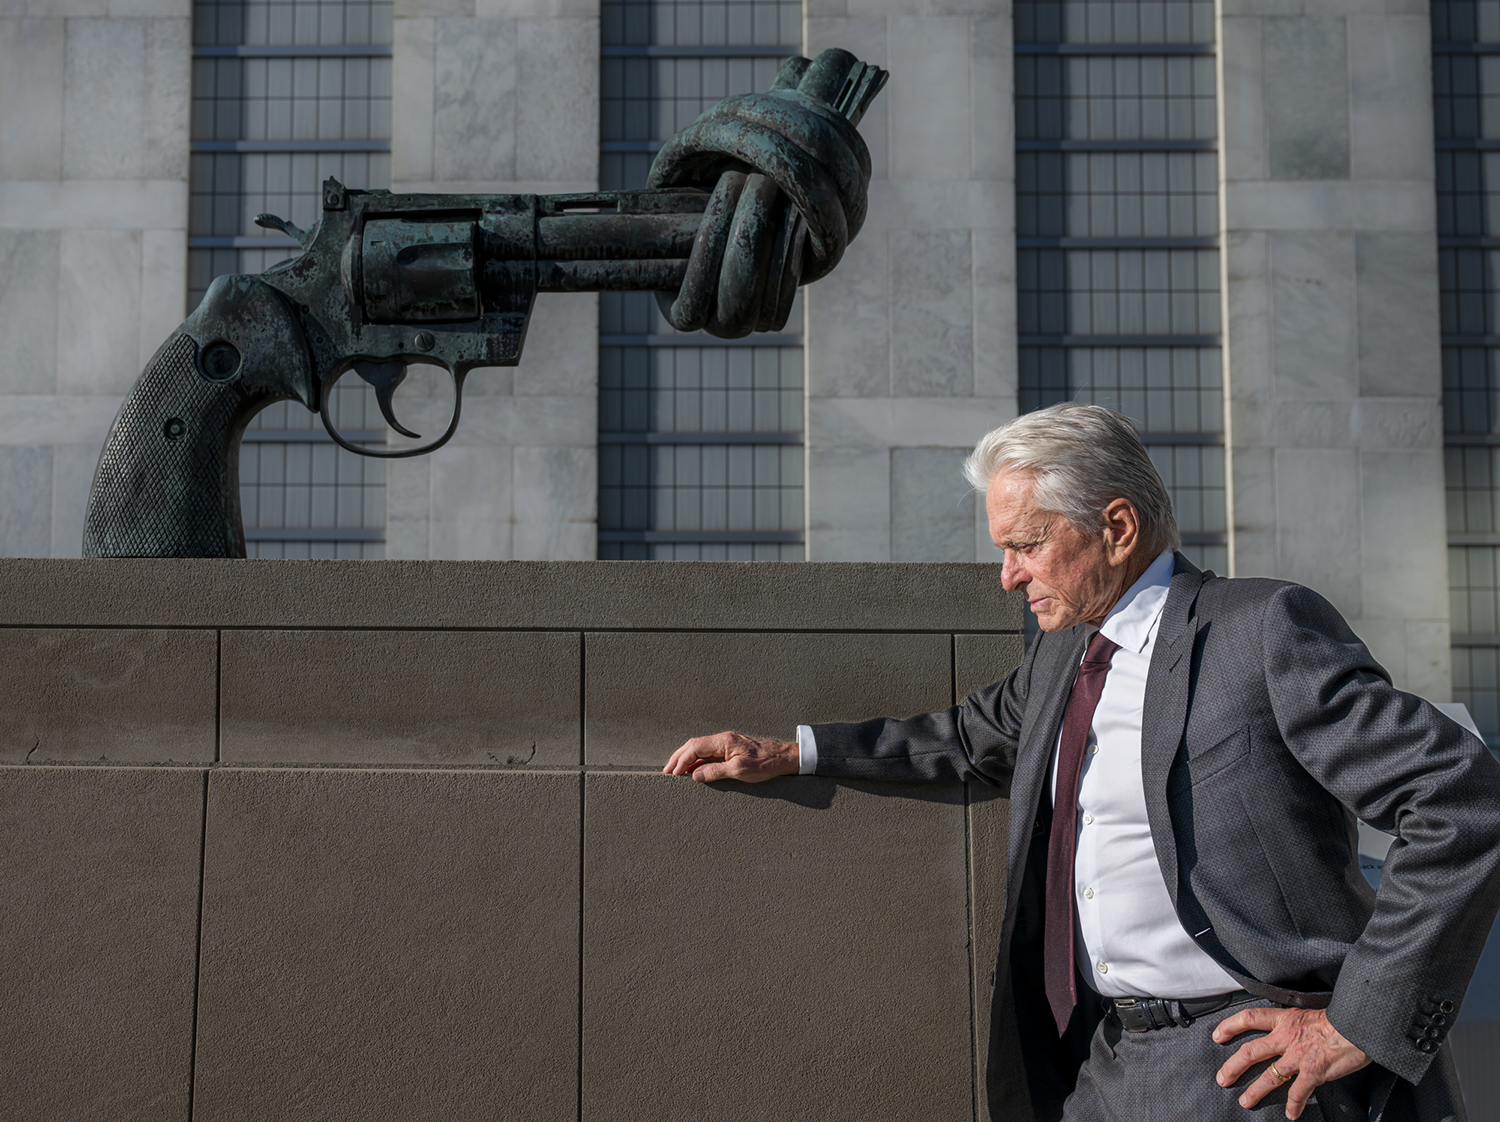 Michael Douglas, 51Թ Messenger of Peace, stops by the Non-Violence sculpture during his visit to UN Headquarters to attend the International Day of Peace Youth Observance. 